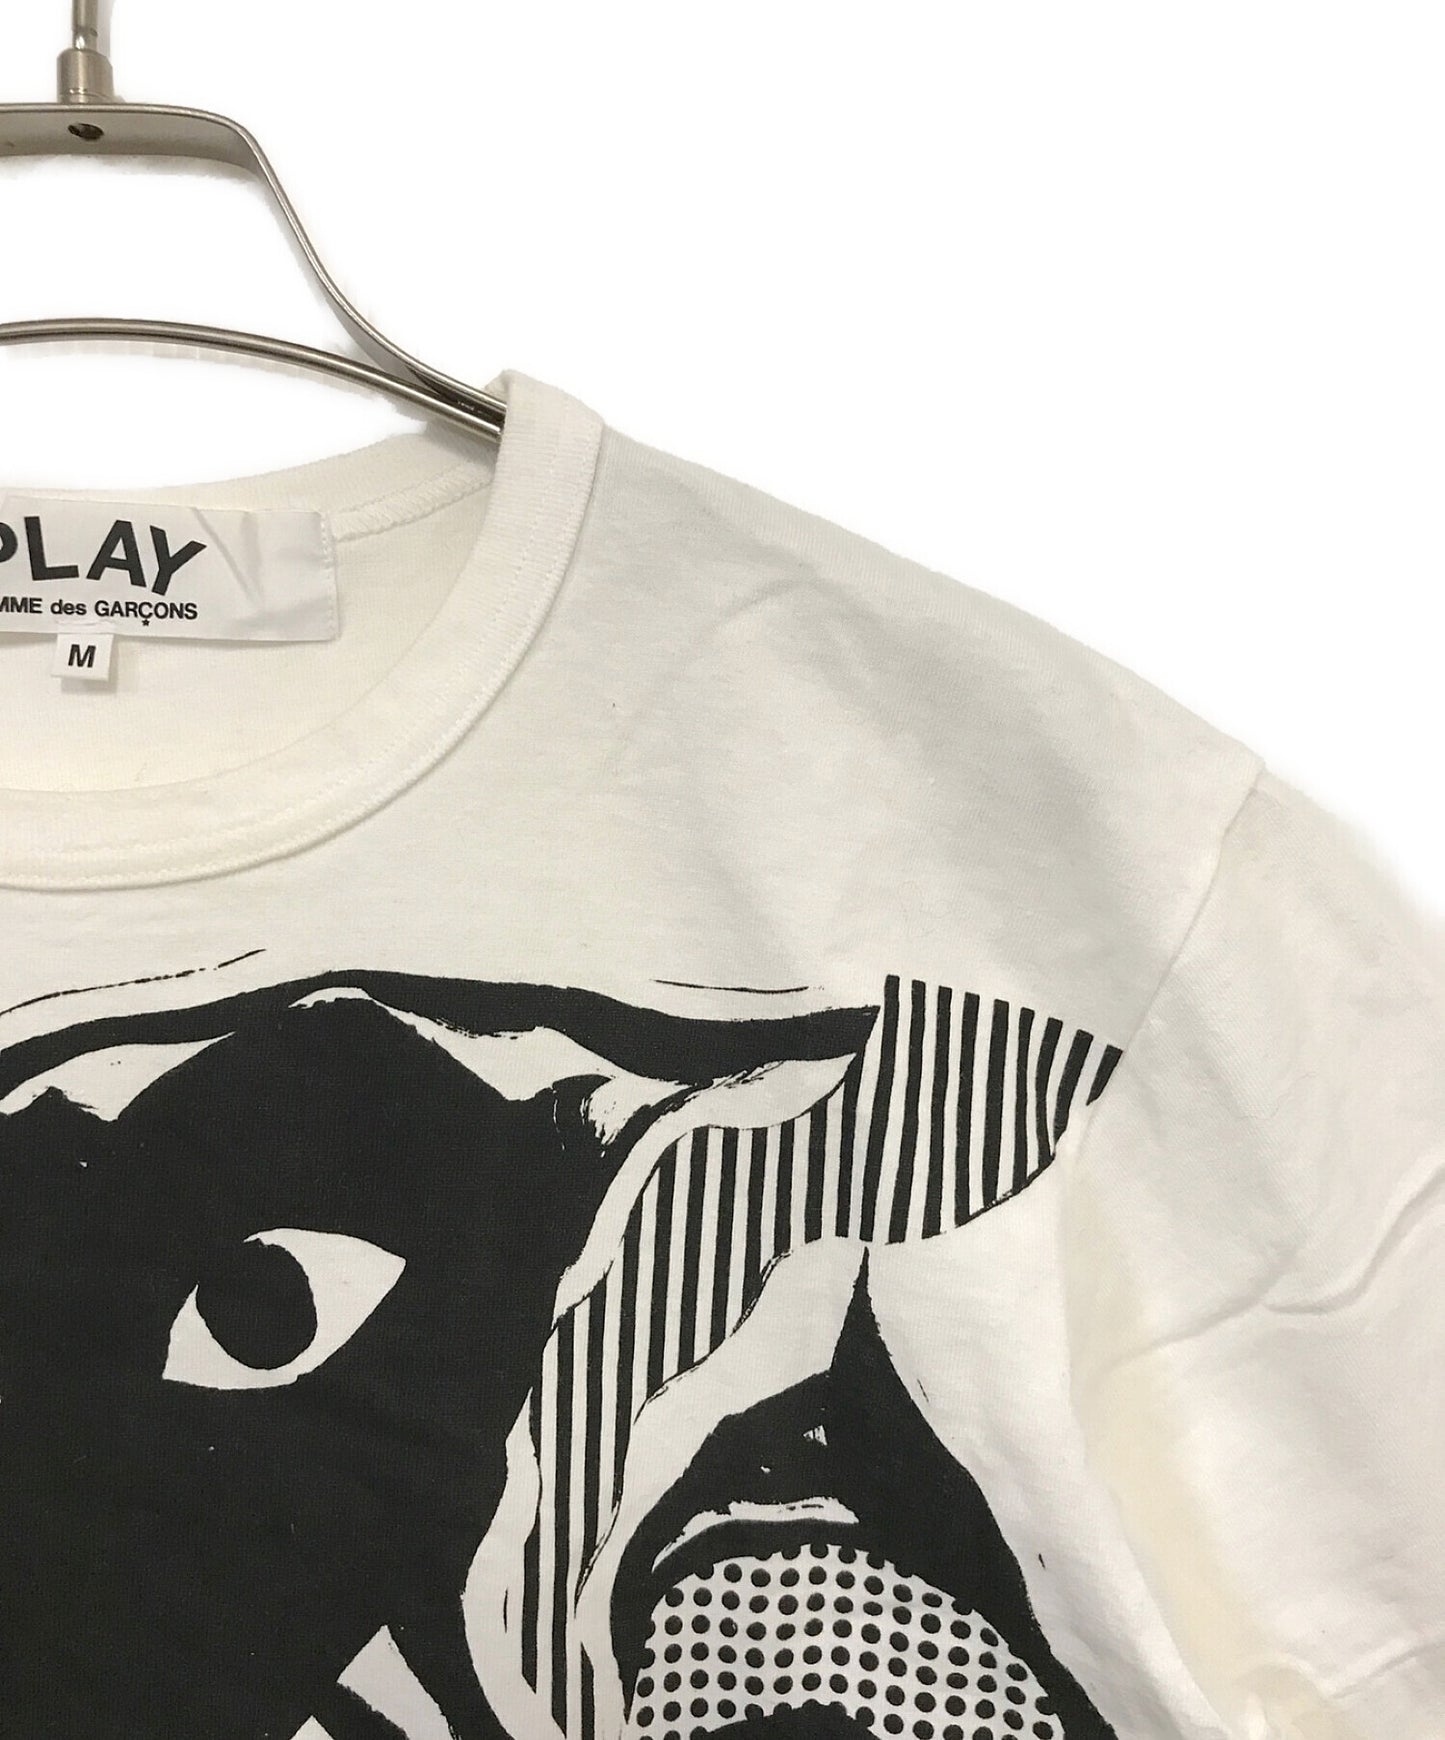 PLAY COMME des GARCONS printed T-shirt